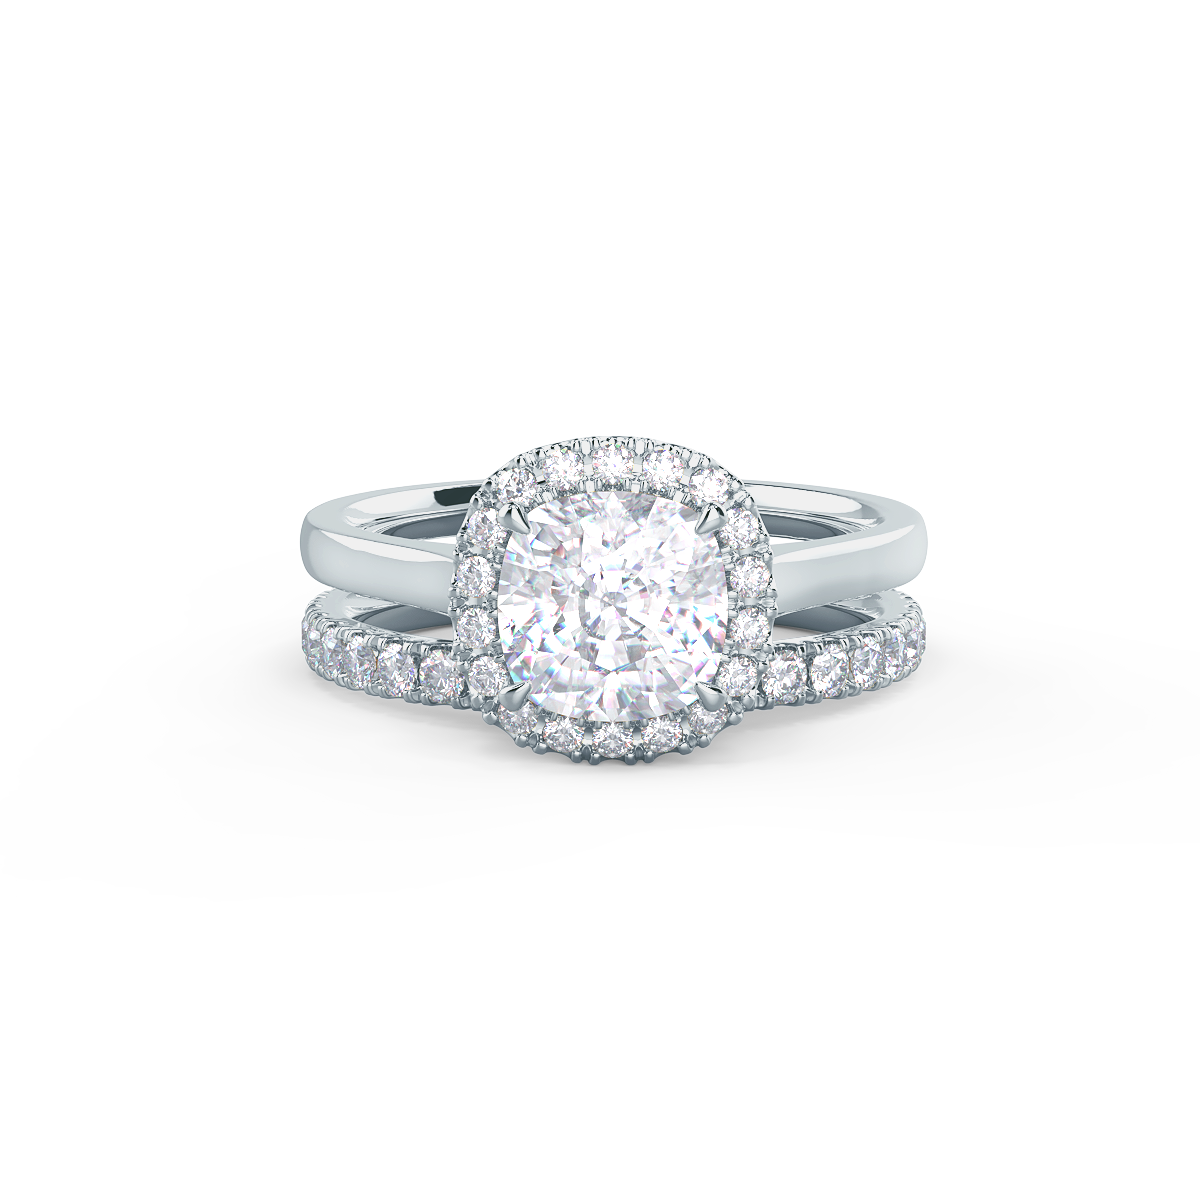  This setting pairs with a variety of wedding band styles.    Shop All Wedding Bands   